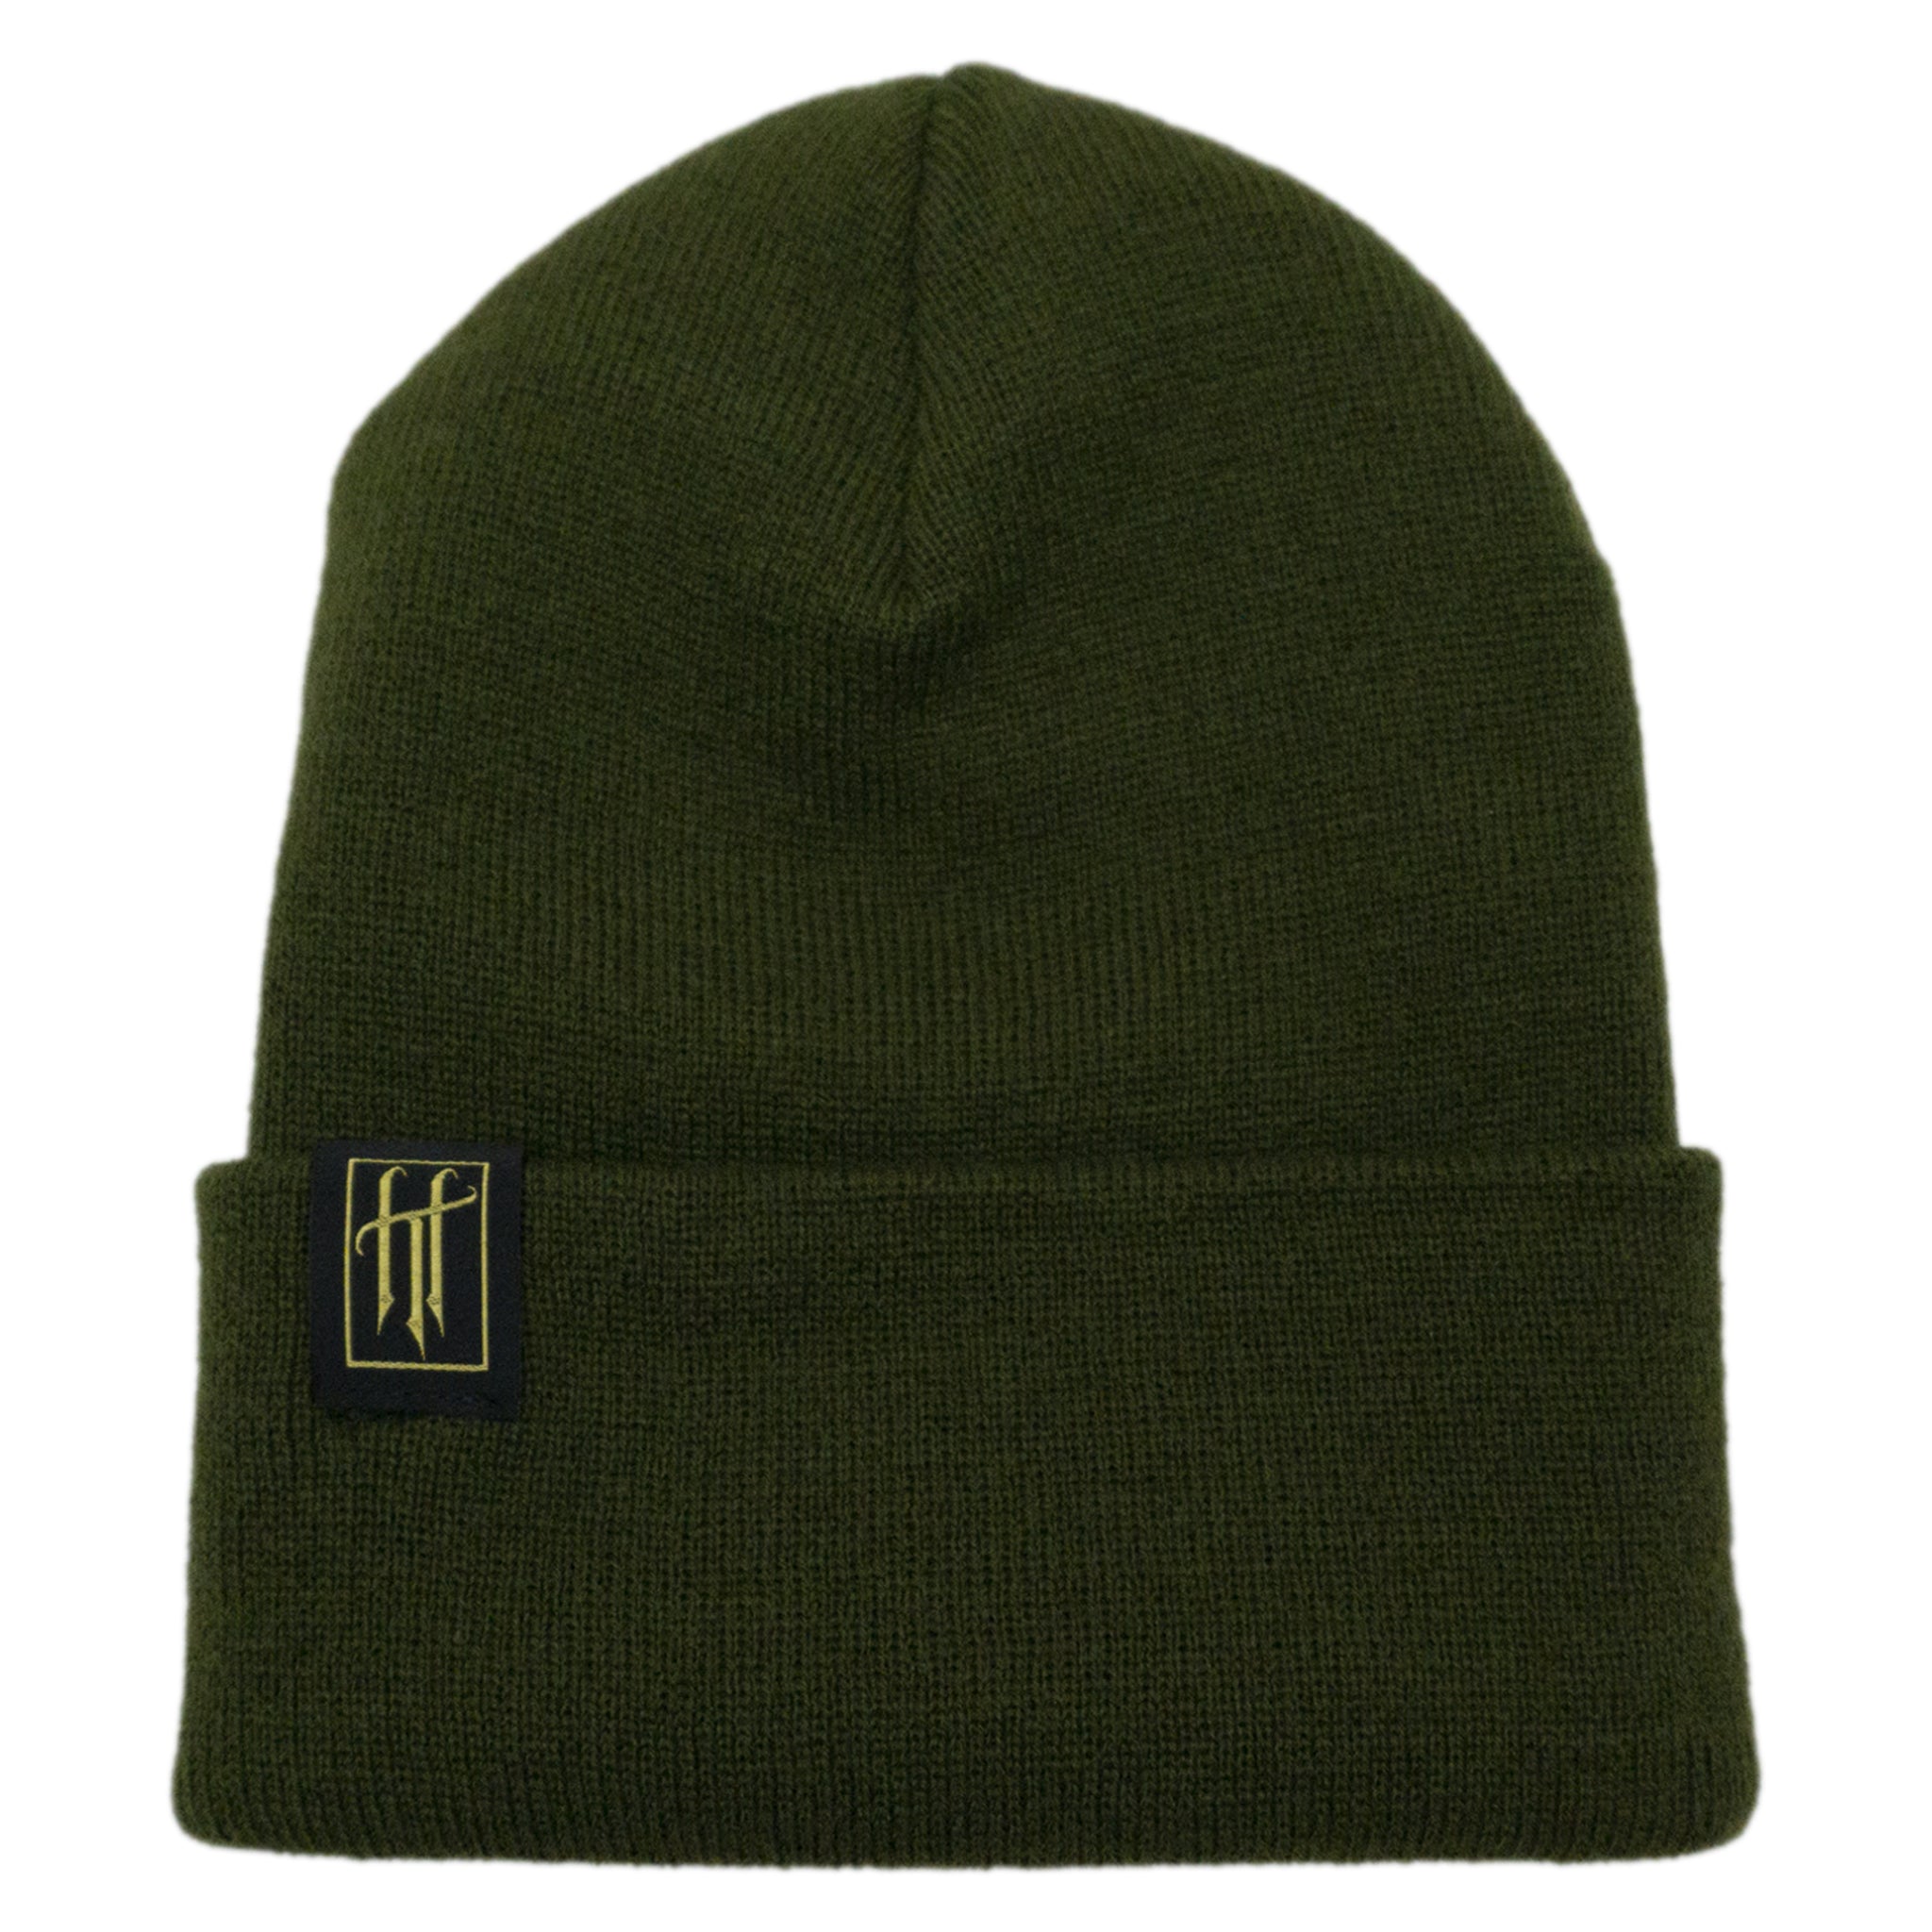 The New Classic Beanie (Olive)